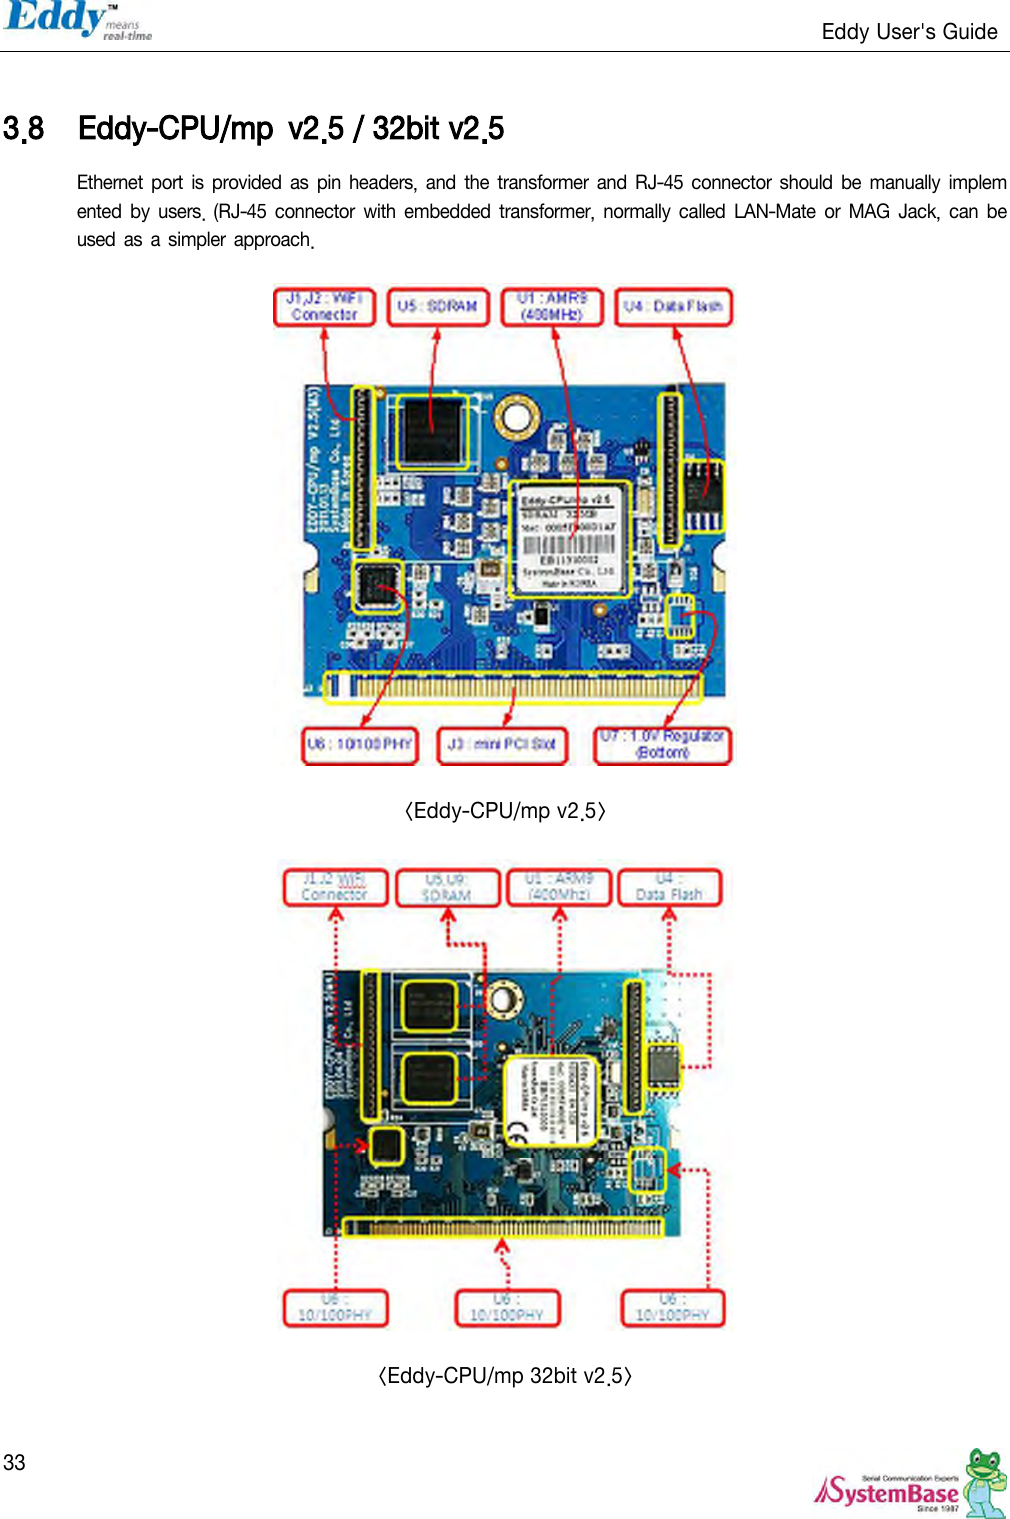                                                                   Eddy User&apos;s Guide   33  3.8 Eddy-CPU/mp  v2.5 / 32bit v2.5 Ethernet  port  is provided as pin headers, and the transformer  and RJ-45 connector  should  be  manually  implemented  by users.  (RJ-45 connector with embedded transformer, normally  called  LAN-Mate or  MAG  Jack, can  be used as a simpler approach.    &lt;Eddy-CPU/mp v2.5&gt;    &lt;Eddy-CPU/mp 32bit v2.5&gt;  